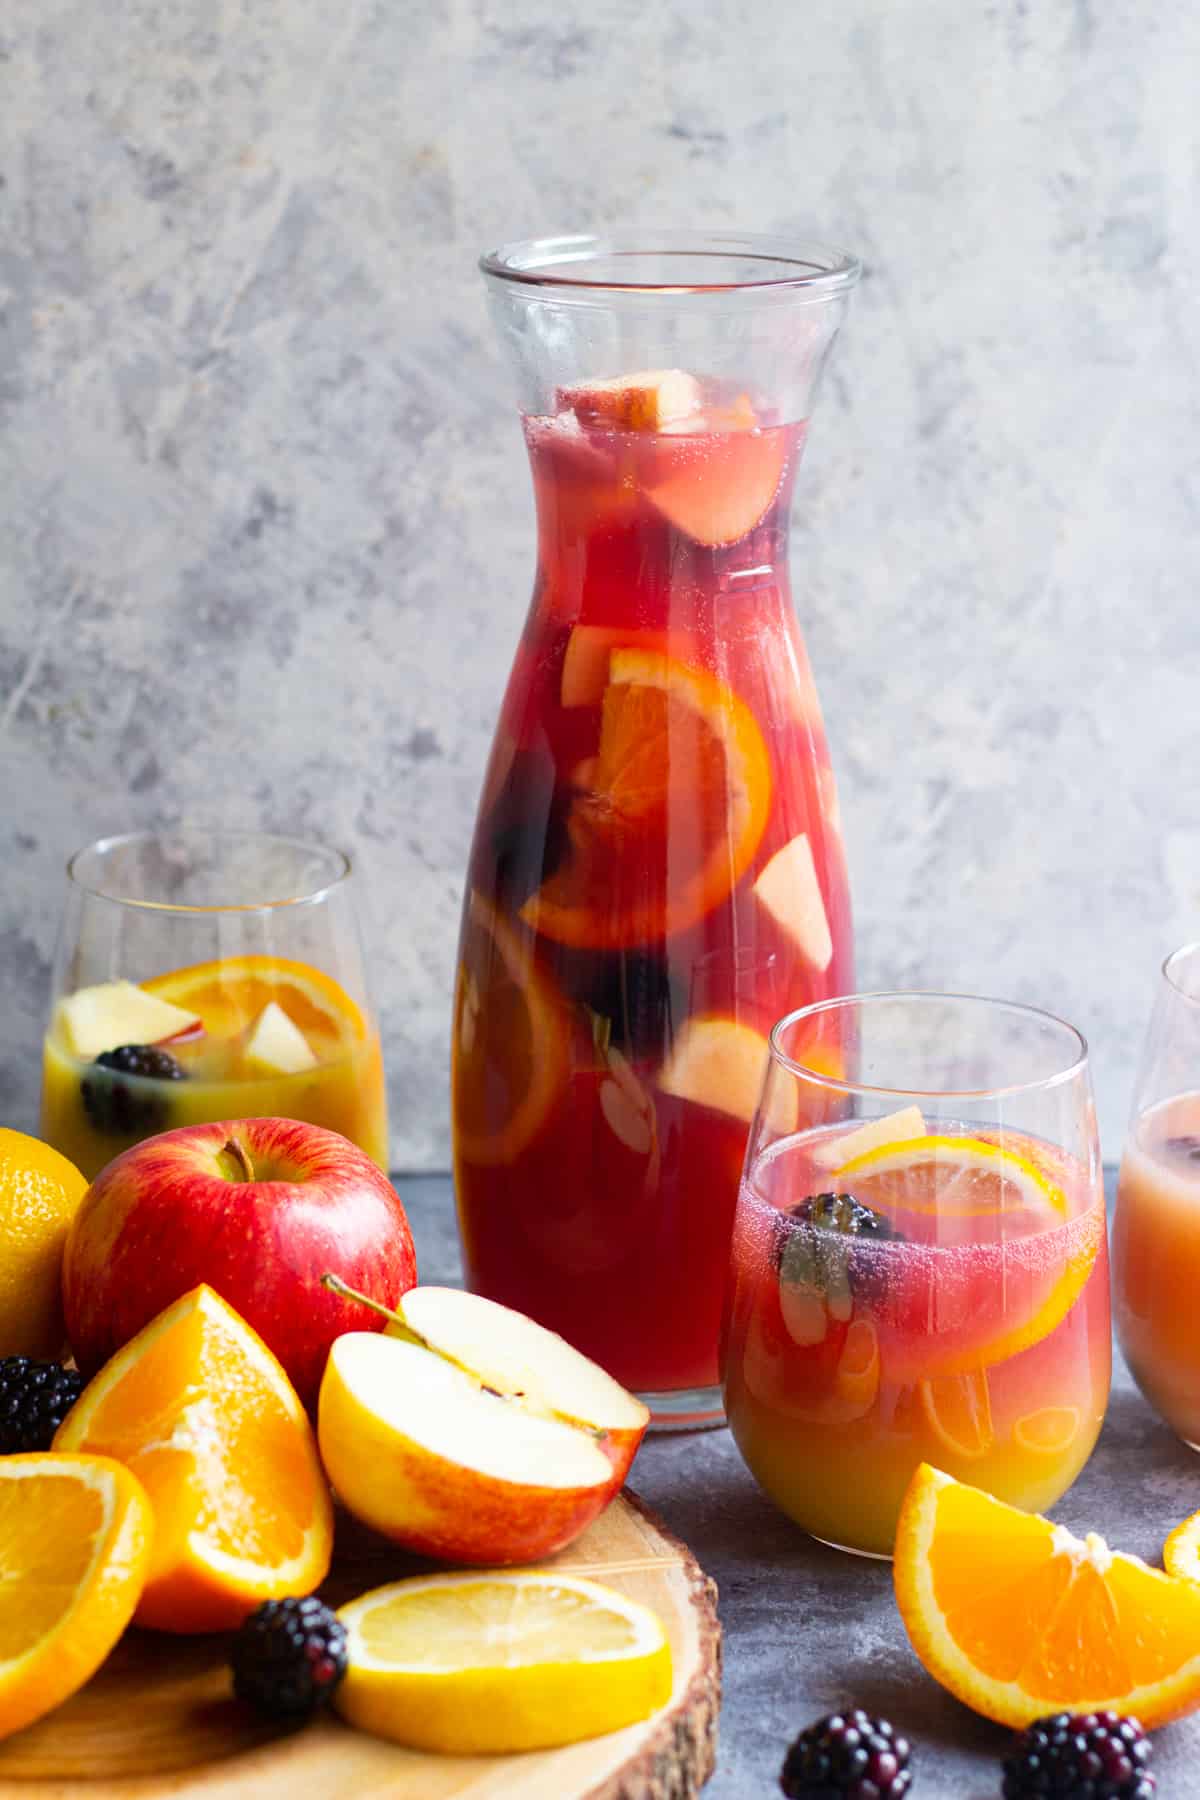 Non-alcoholic sangria recipe is ready in 10 minutes and makes a great drink for any occasion from parties to a casual family gathering. Packed with flavor thanks to fresh fruit, this easy virgin sangria recipe is going to be a crowd-pleaser that everyone would love.
